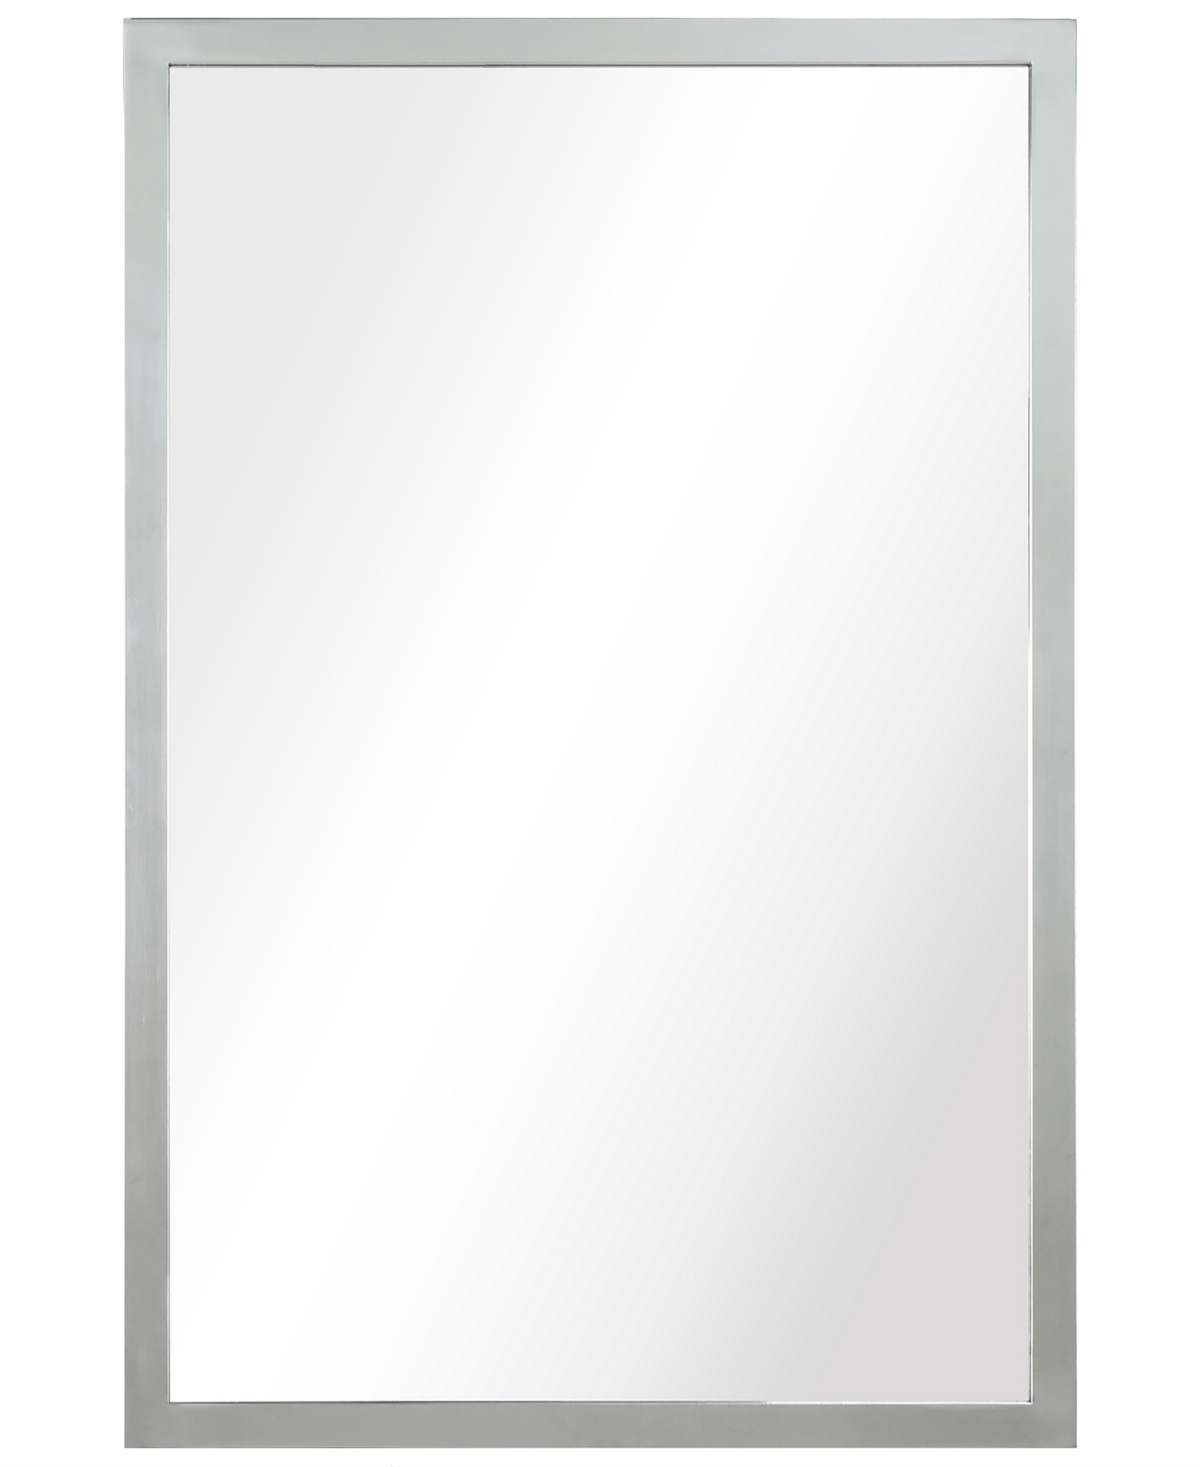 Contempo Polished Stainless Steel Rectangular Wall Mirror, 20" x 30" - Silver-Tone